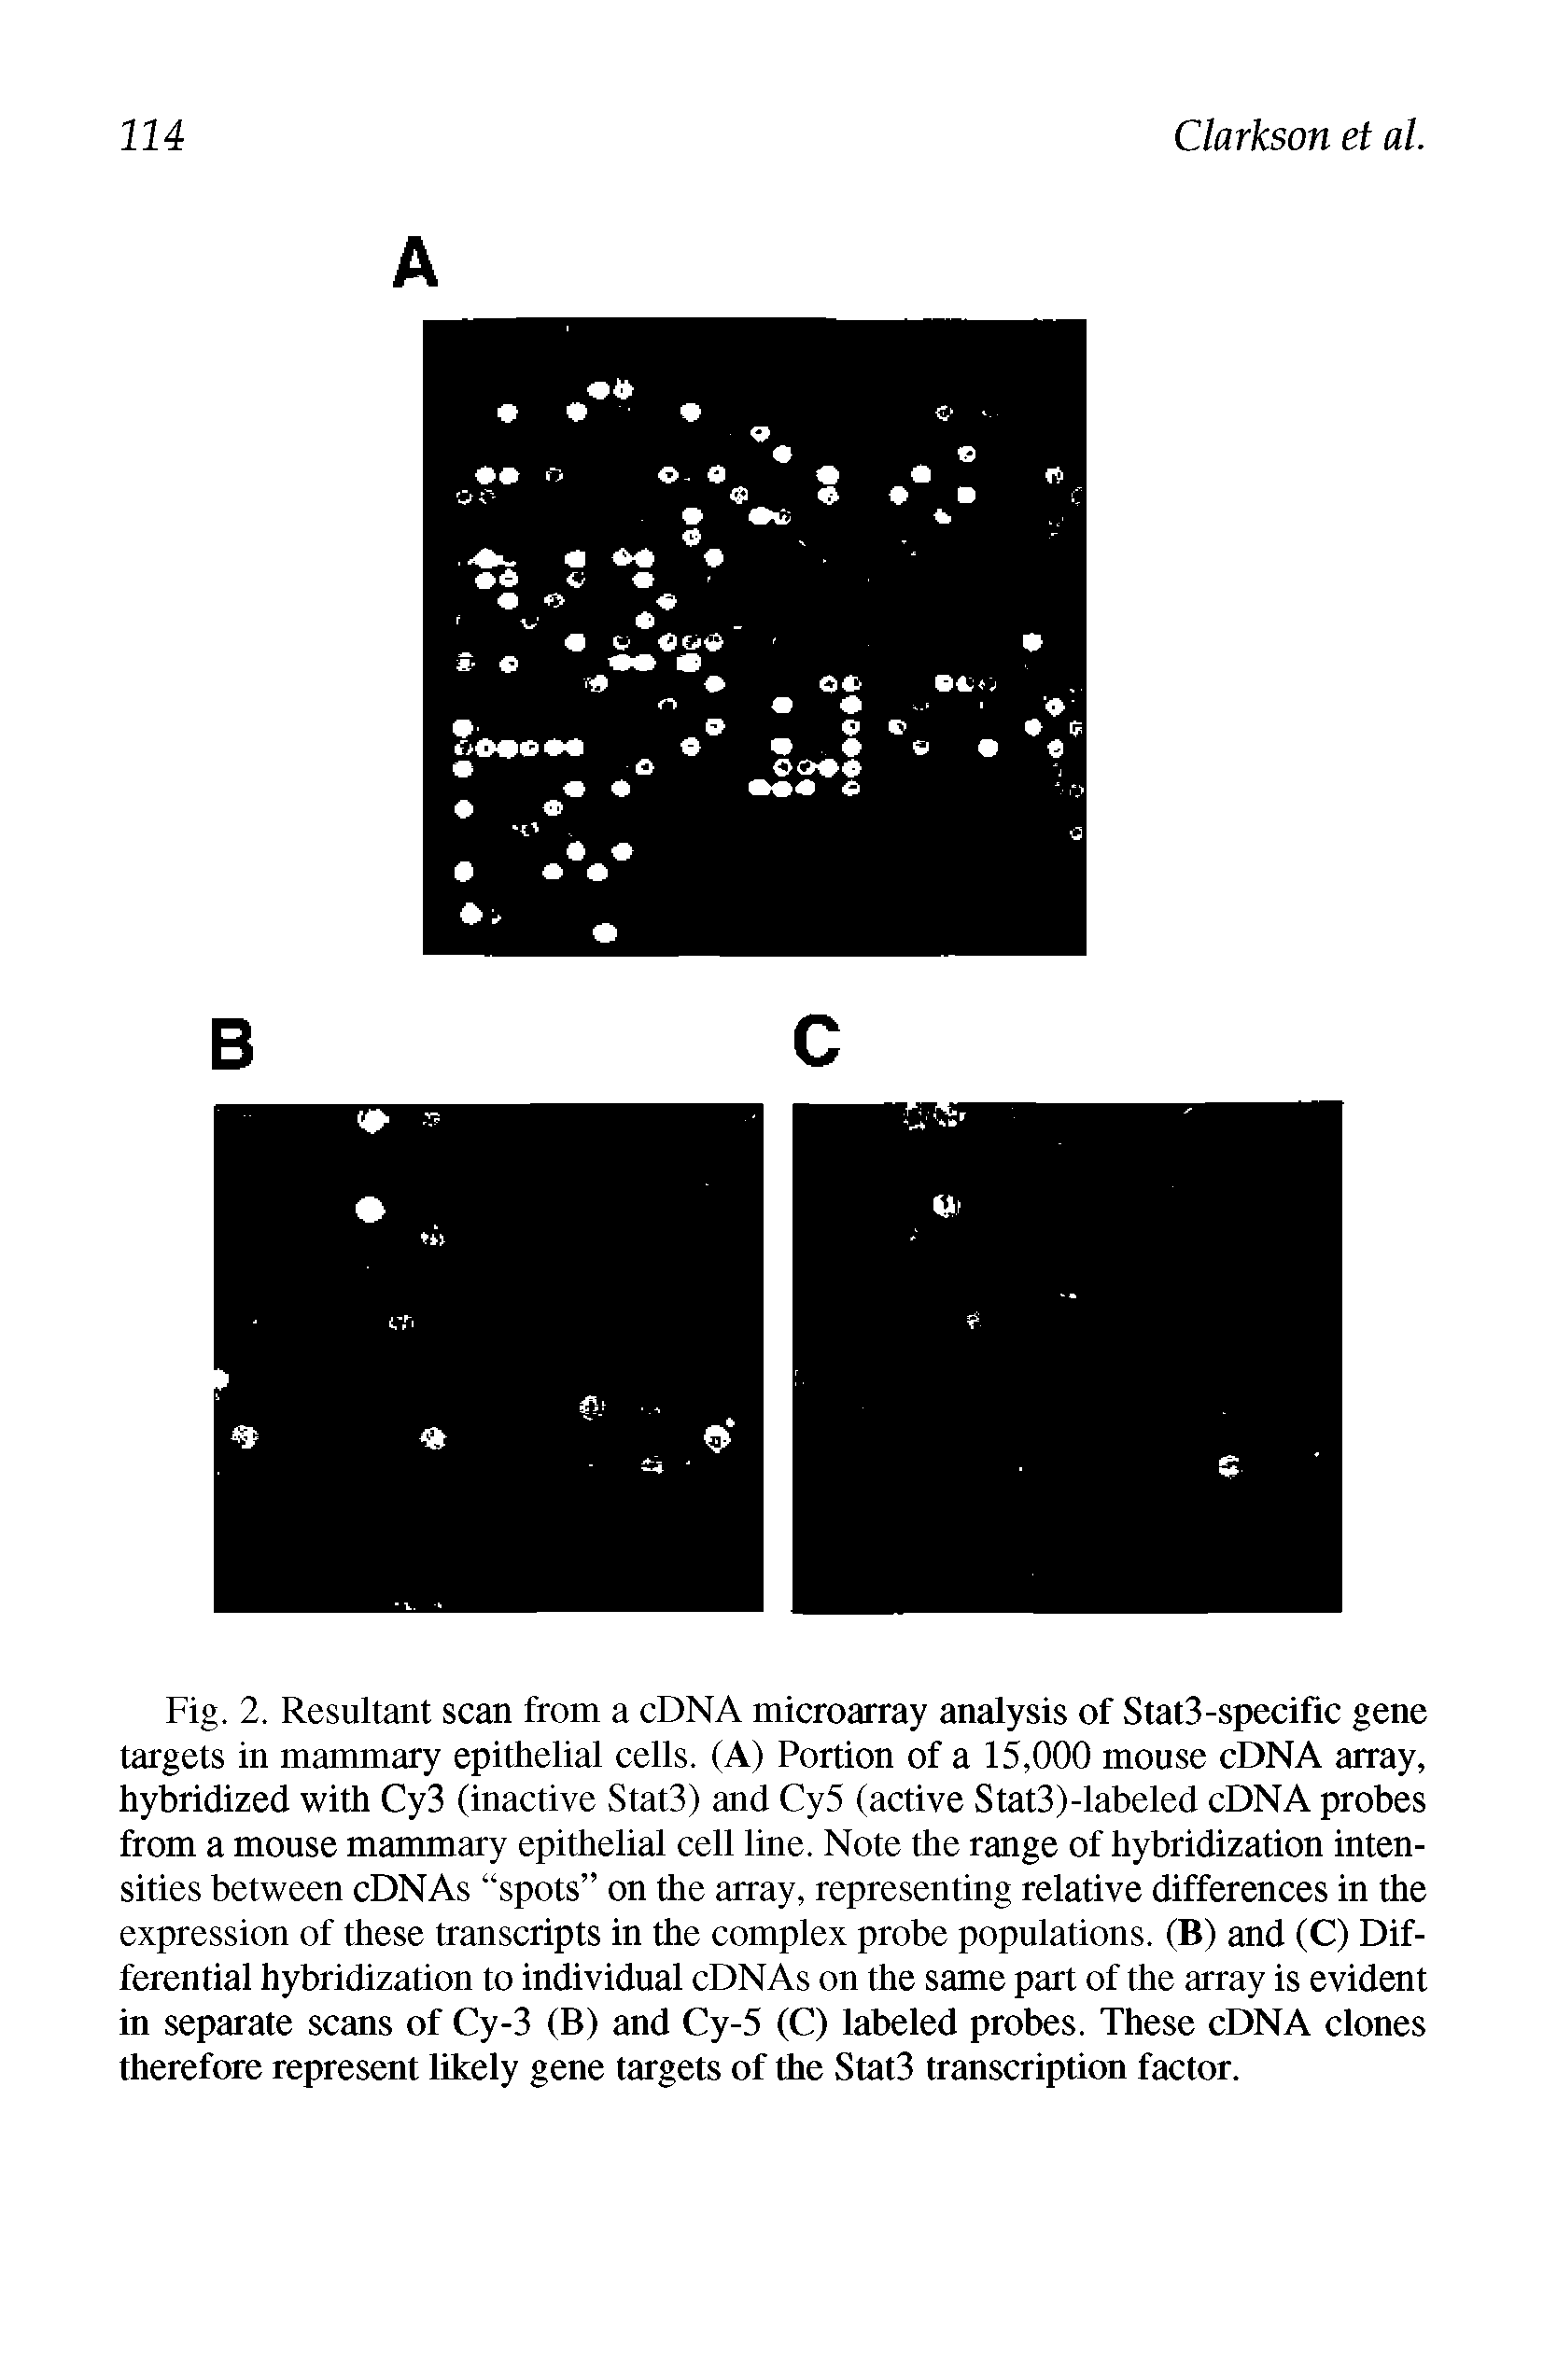 Fig. 2. Resultant scan from a cDNA microarray analysis of Stat3-specific gene targets in mammary epithelial cells. (A) Portion of a 15,000 mouse cDNA array, hybridized with Cy3 (inactive Stat3) and Cy5 (active Stat3)-labeled cDNA probes from a mouse mammary epithelial cell line. Note the range of hybridization intensities between cDNAs spots on the array, representing relative differences in the expression of these transcripts in the complex probe populations. (B) and (C) Differential hybridization to individual cDNAs on the same part of the array is evident in separate scans of Cy-3 (B) and Cy-5 (C) labeled probes. These cDNA clones therefore represent likely gene targets of the Stat3 transcription factor.